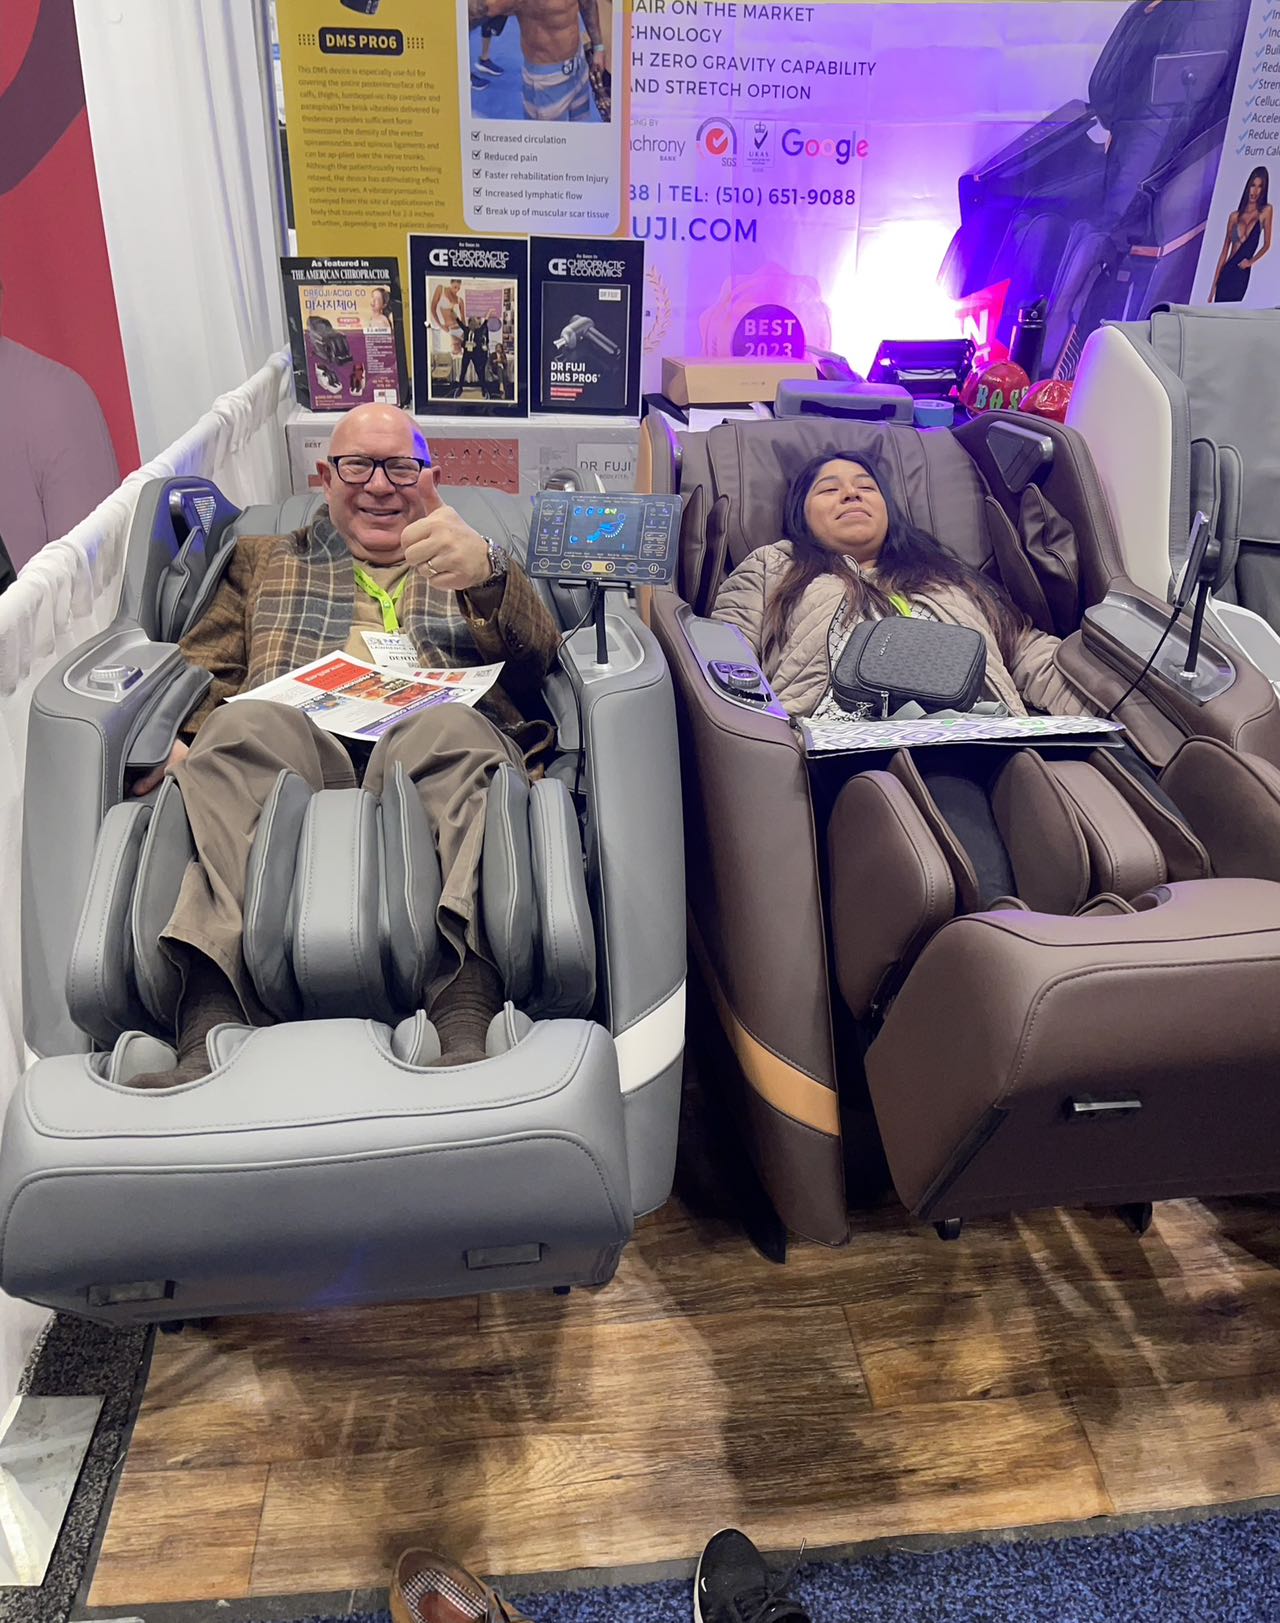 drfuji message chairs at trade shows